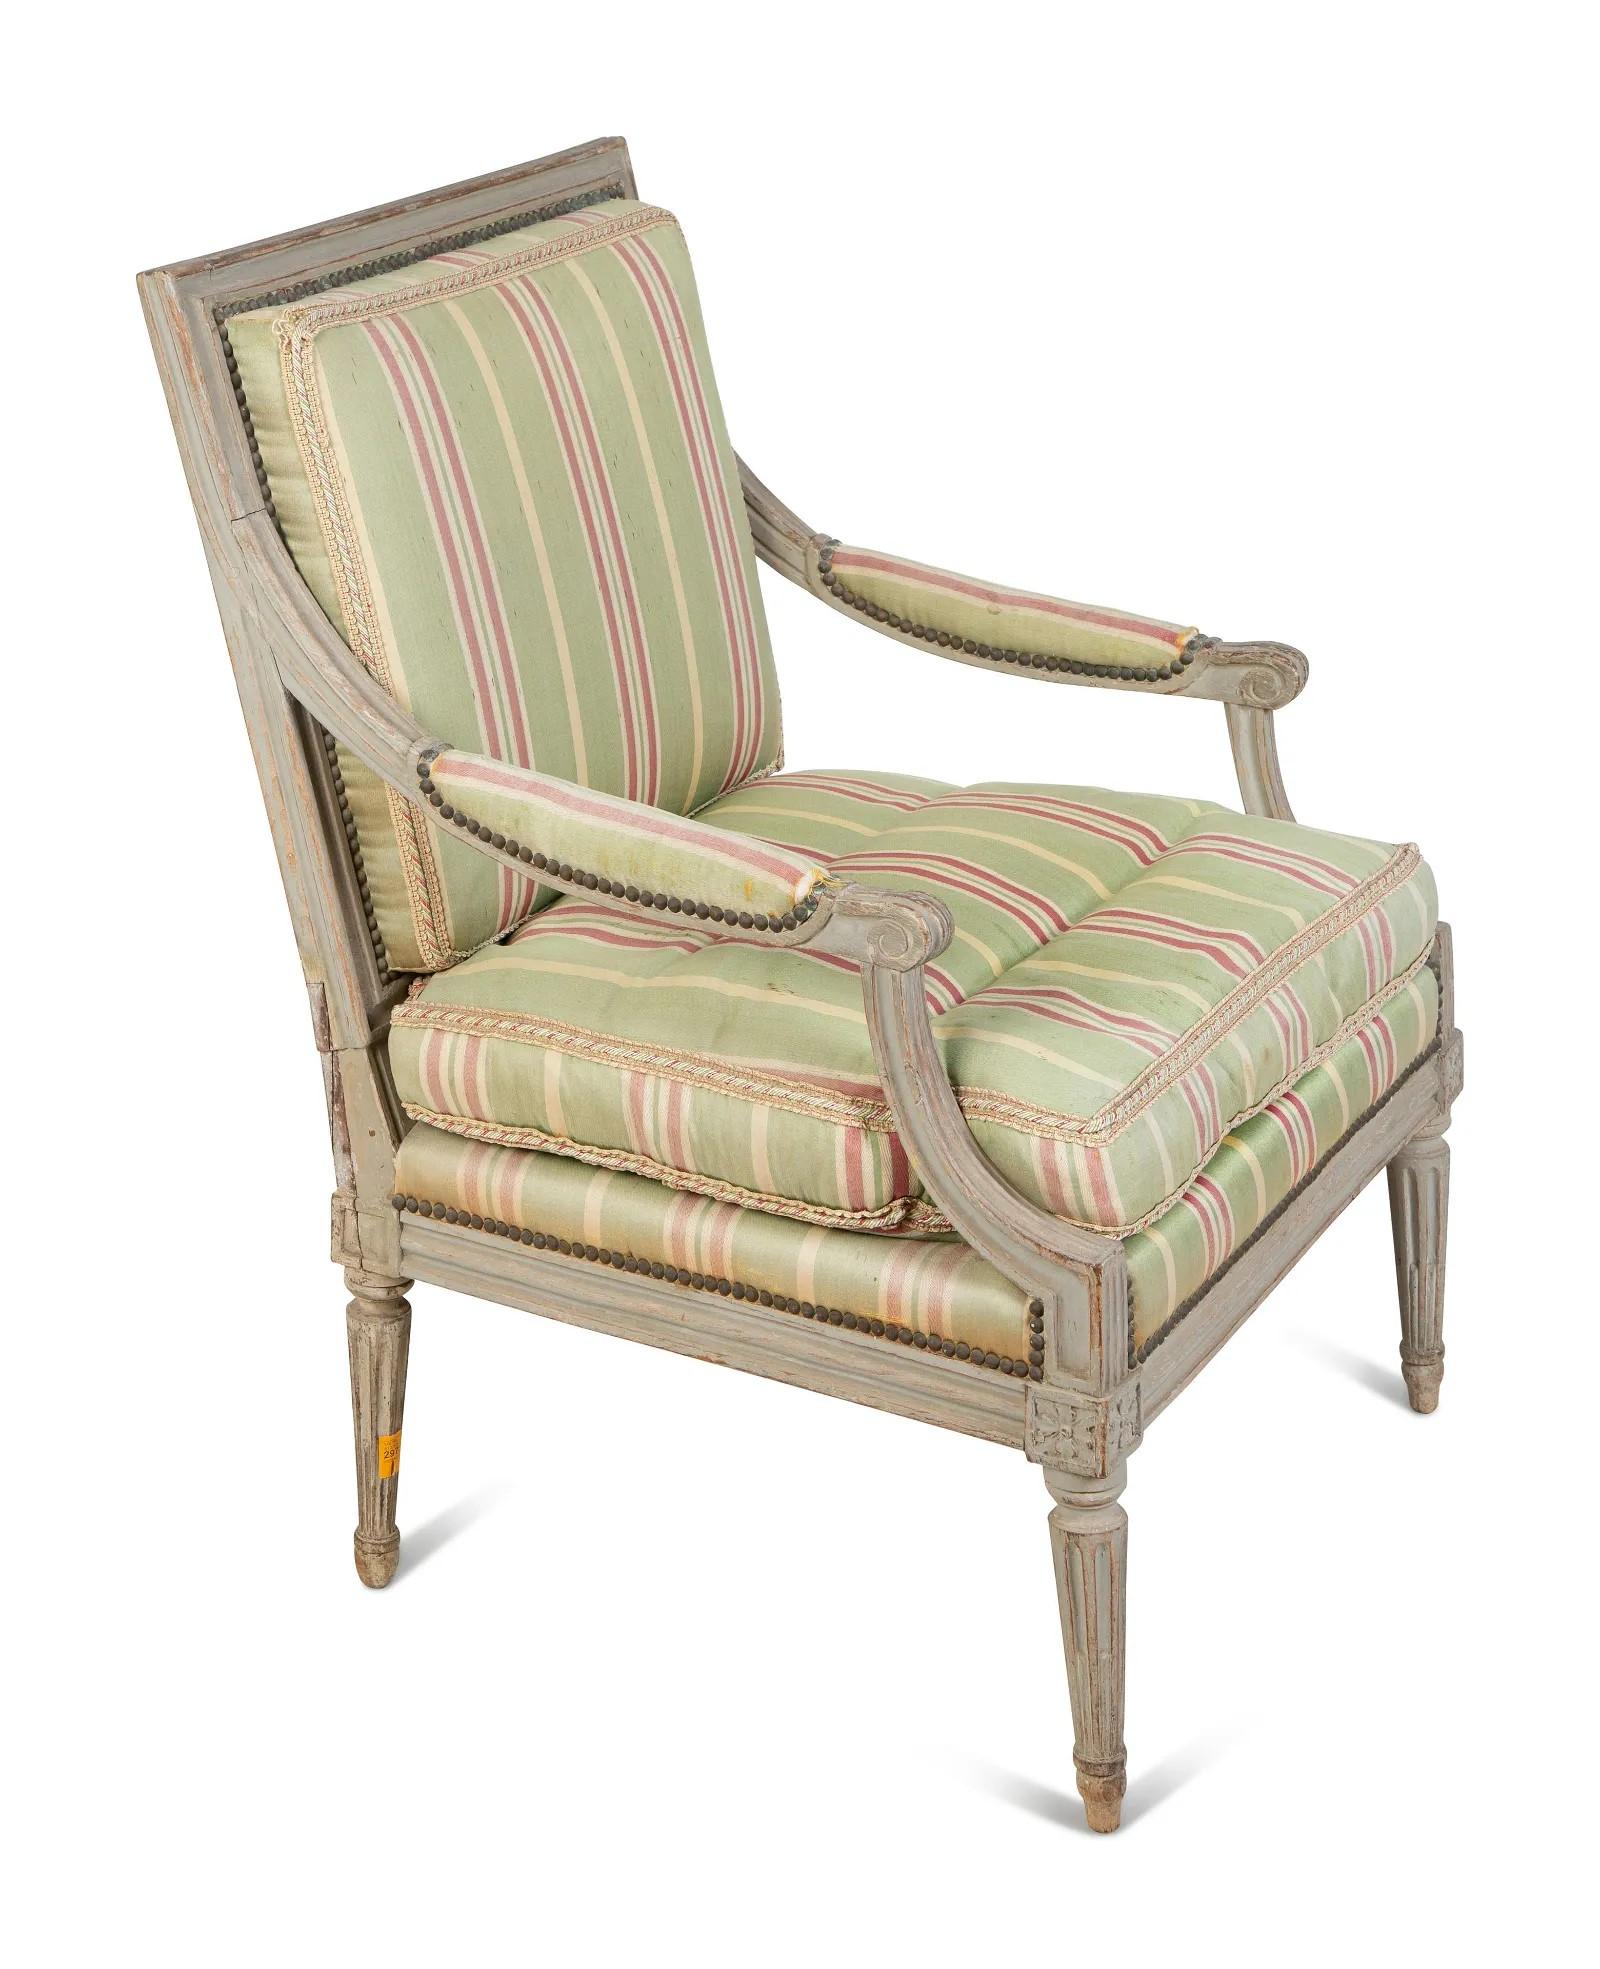 French 18th Century Louis XVI Fauteuil in Original Painted Finish For Sale